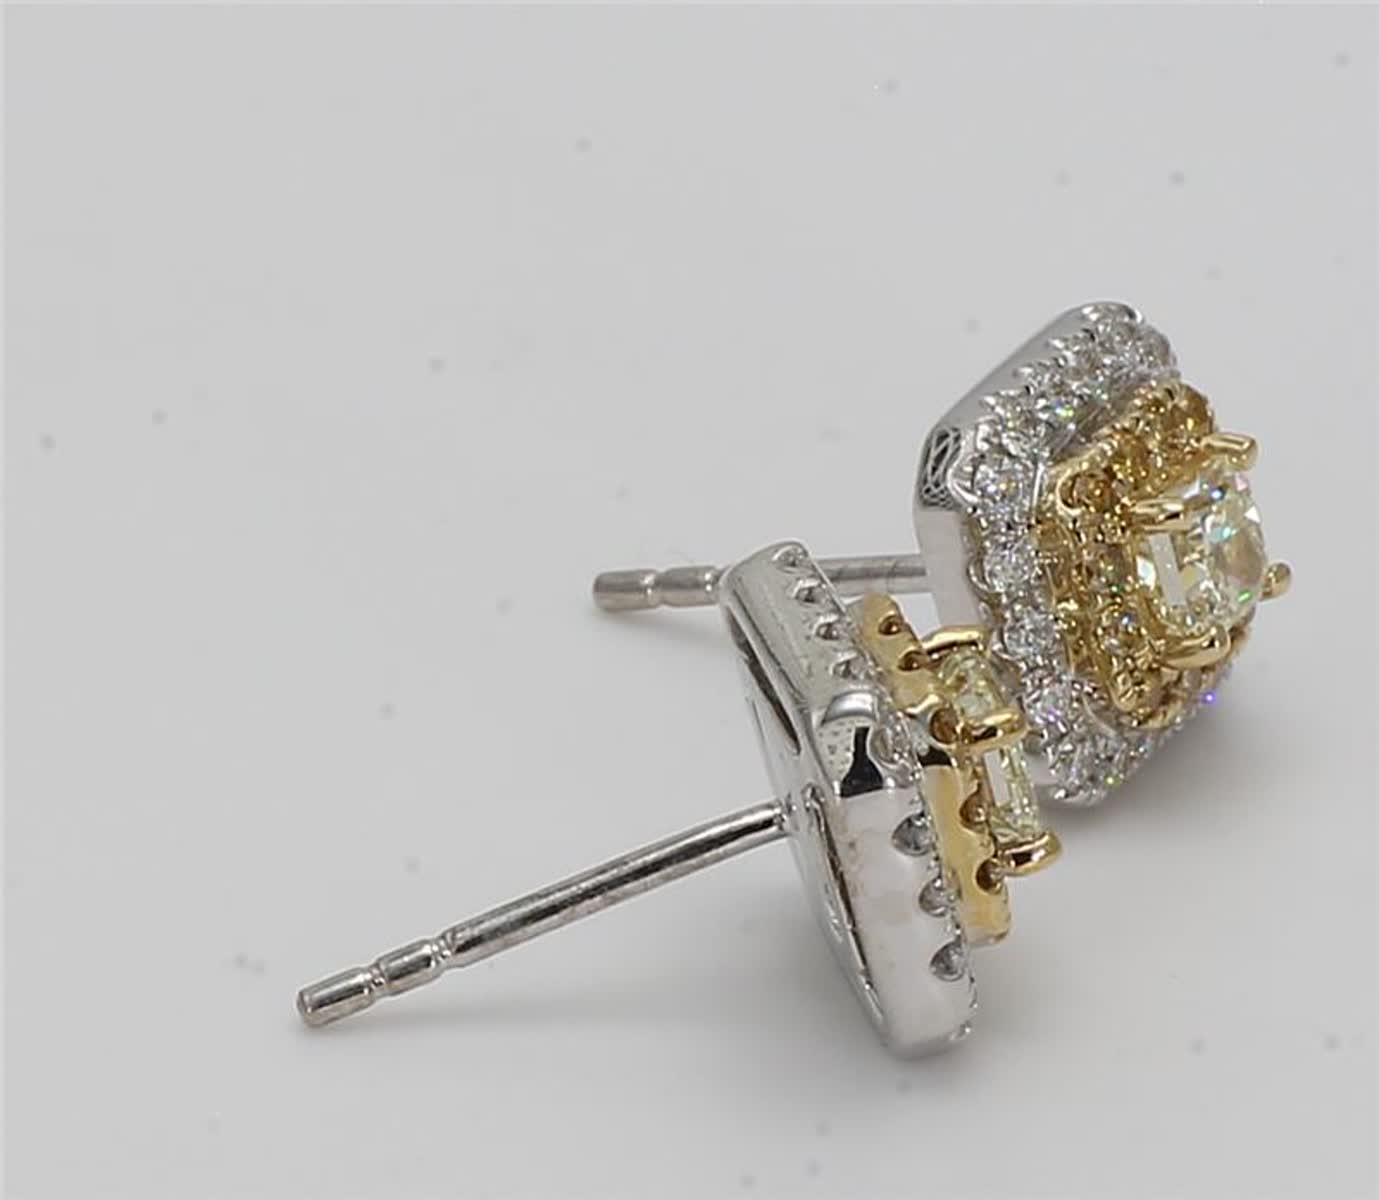 Natural Yellow Cushion and White Diamond 1.24 Carat TW Gold Stud Earrings